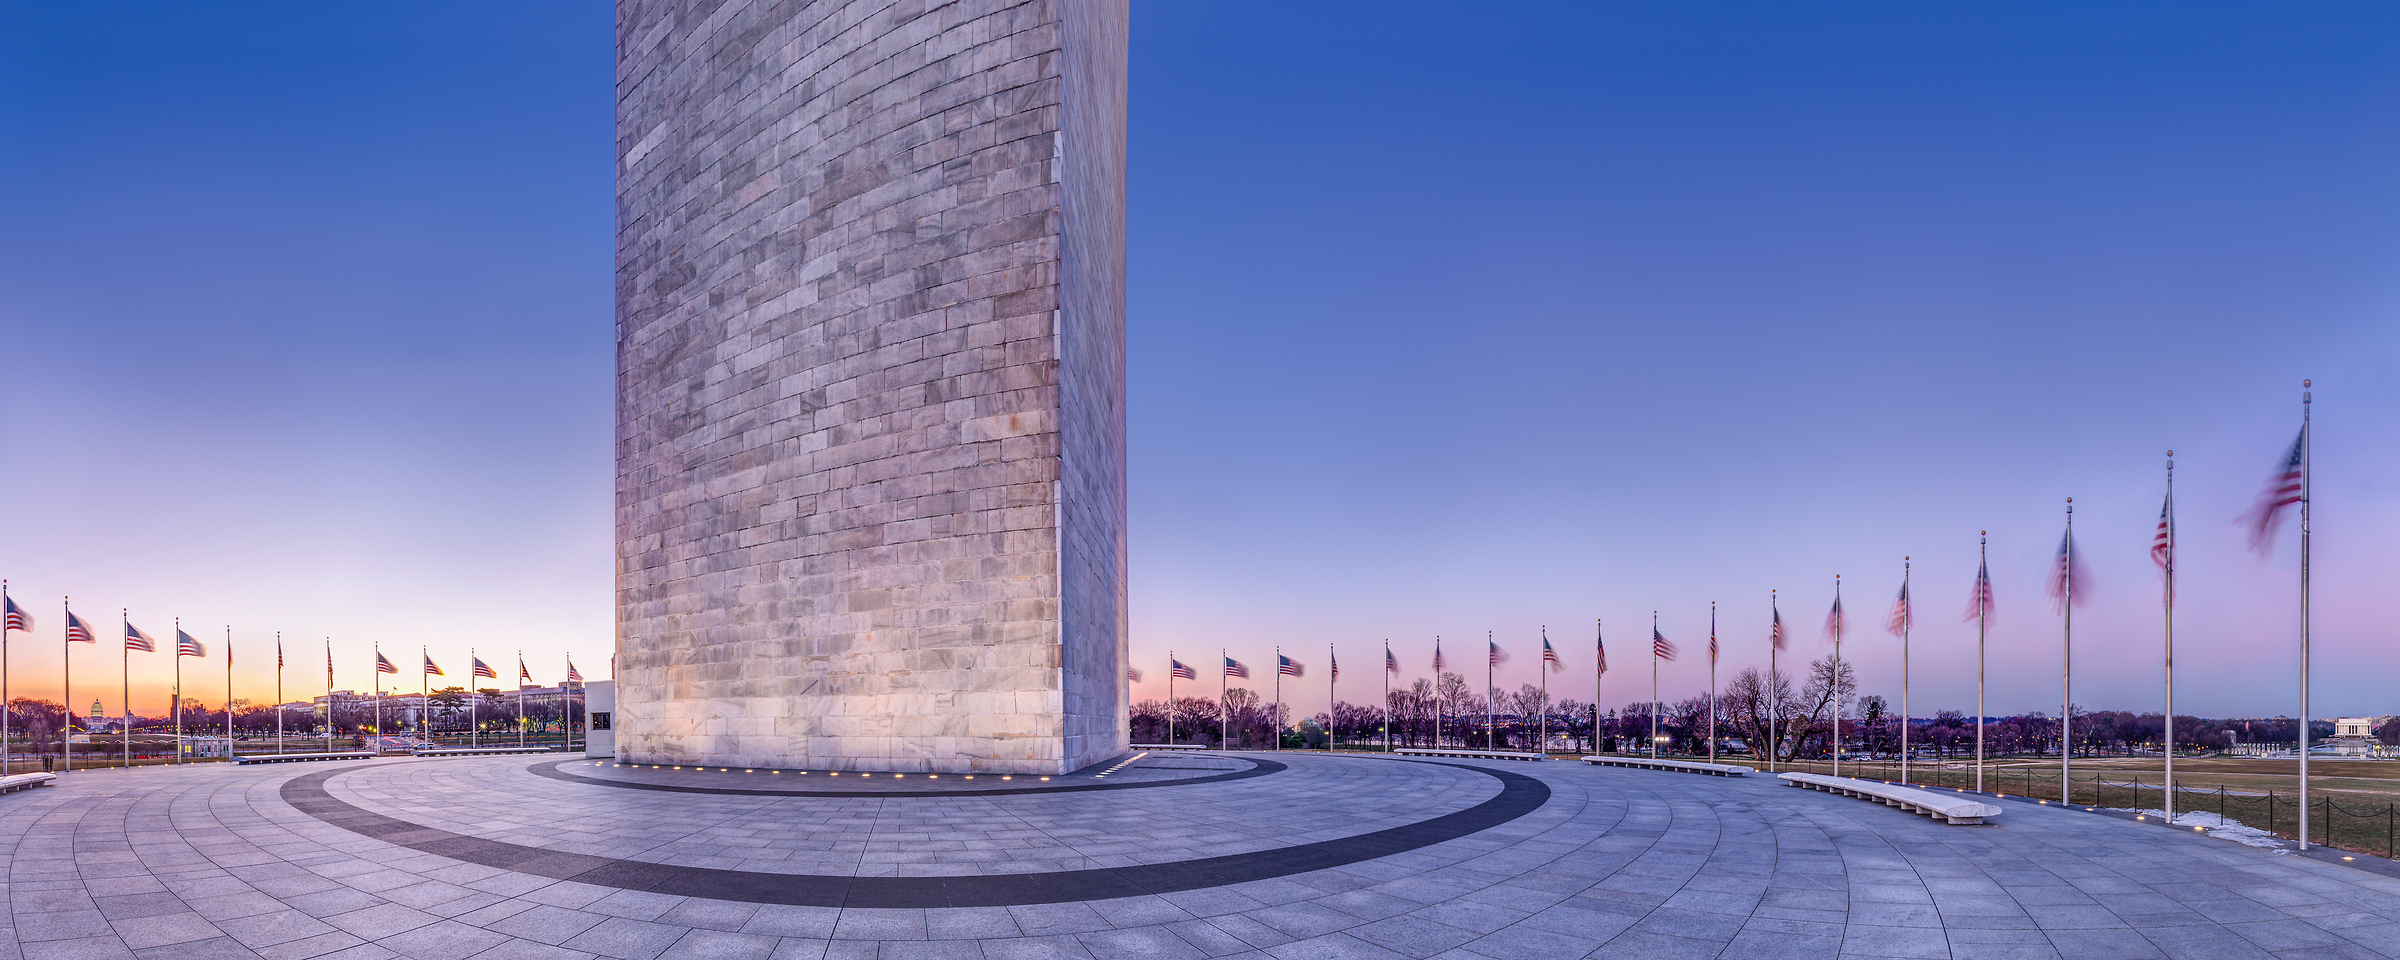 105 megapixels! A very high resolution, large-format VAST photo print of the base of the Washington Monument on the National Mall in Washington DC; photograph created by Tim Lo Monaco in Washington Monument, National Mall, Washington, D.C.